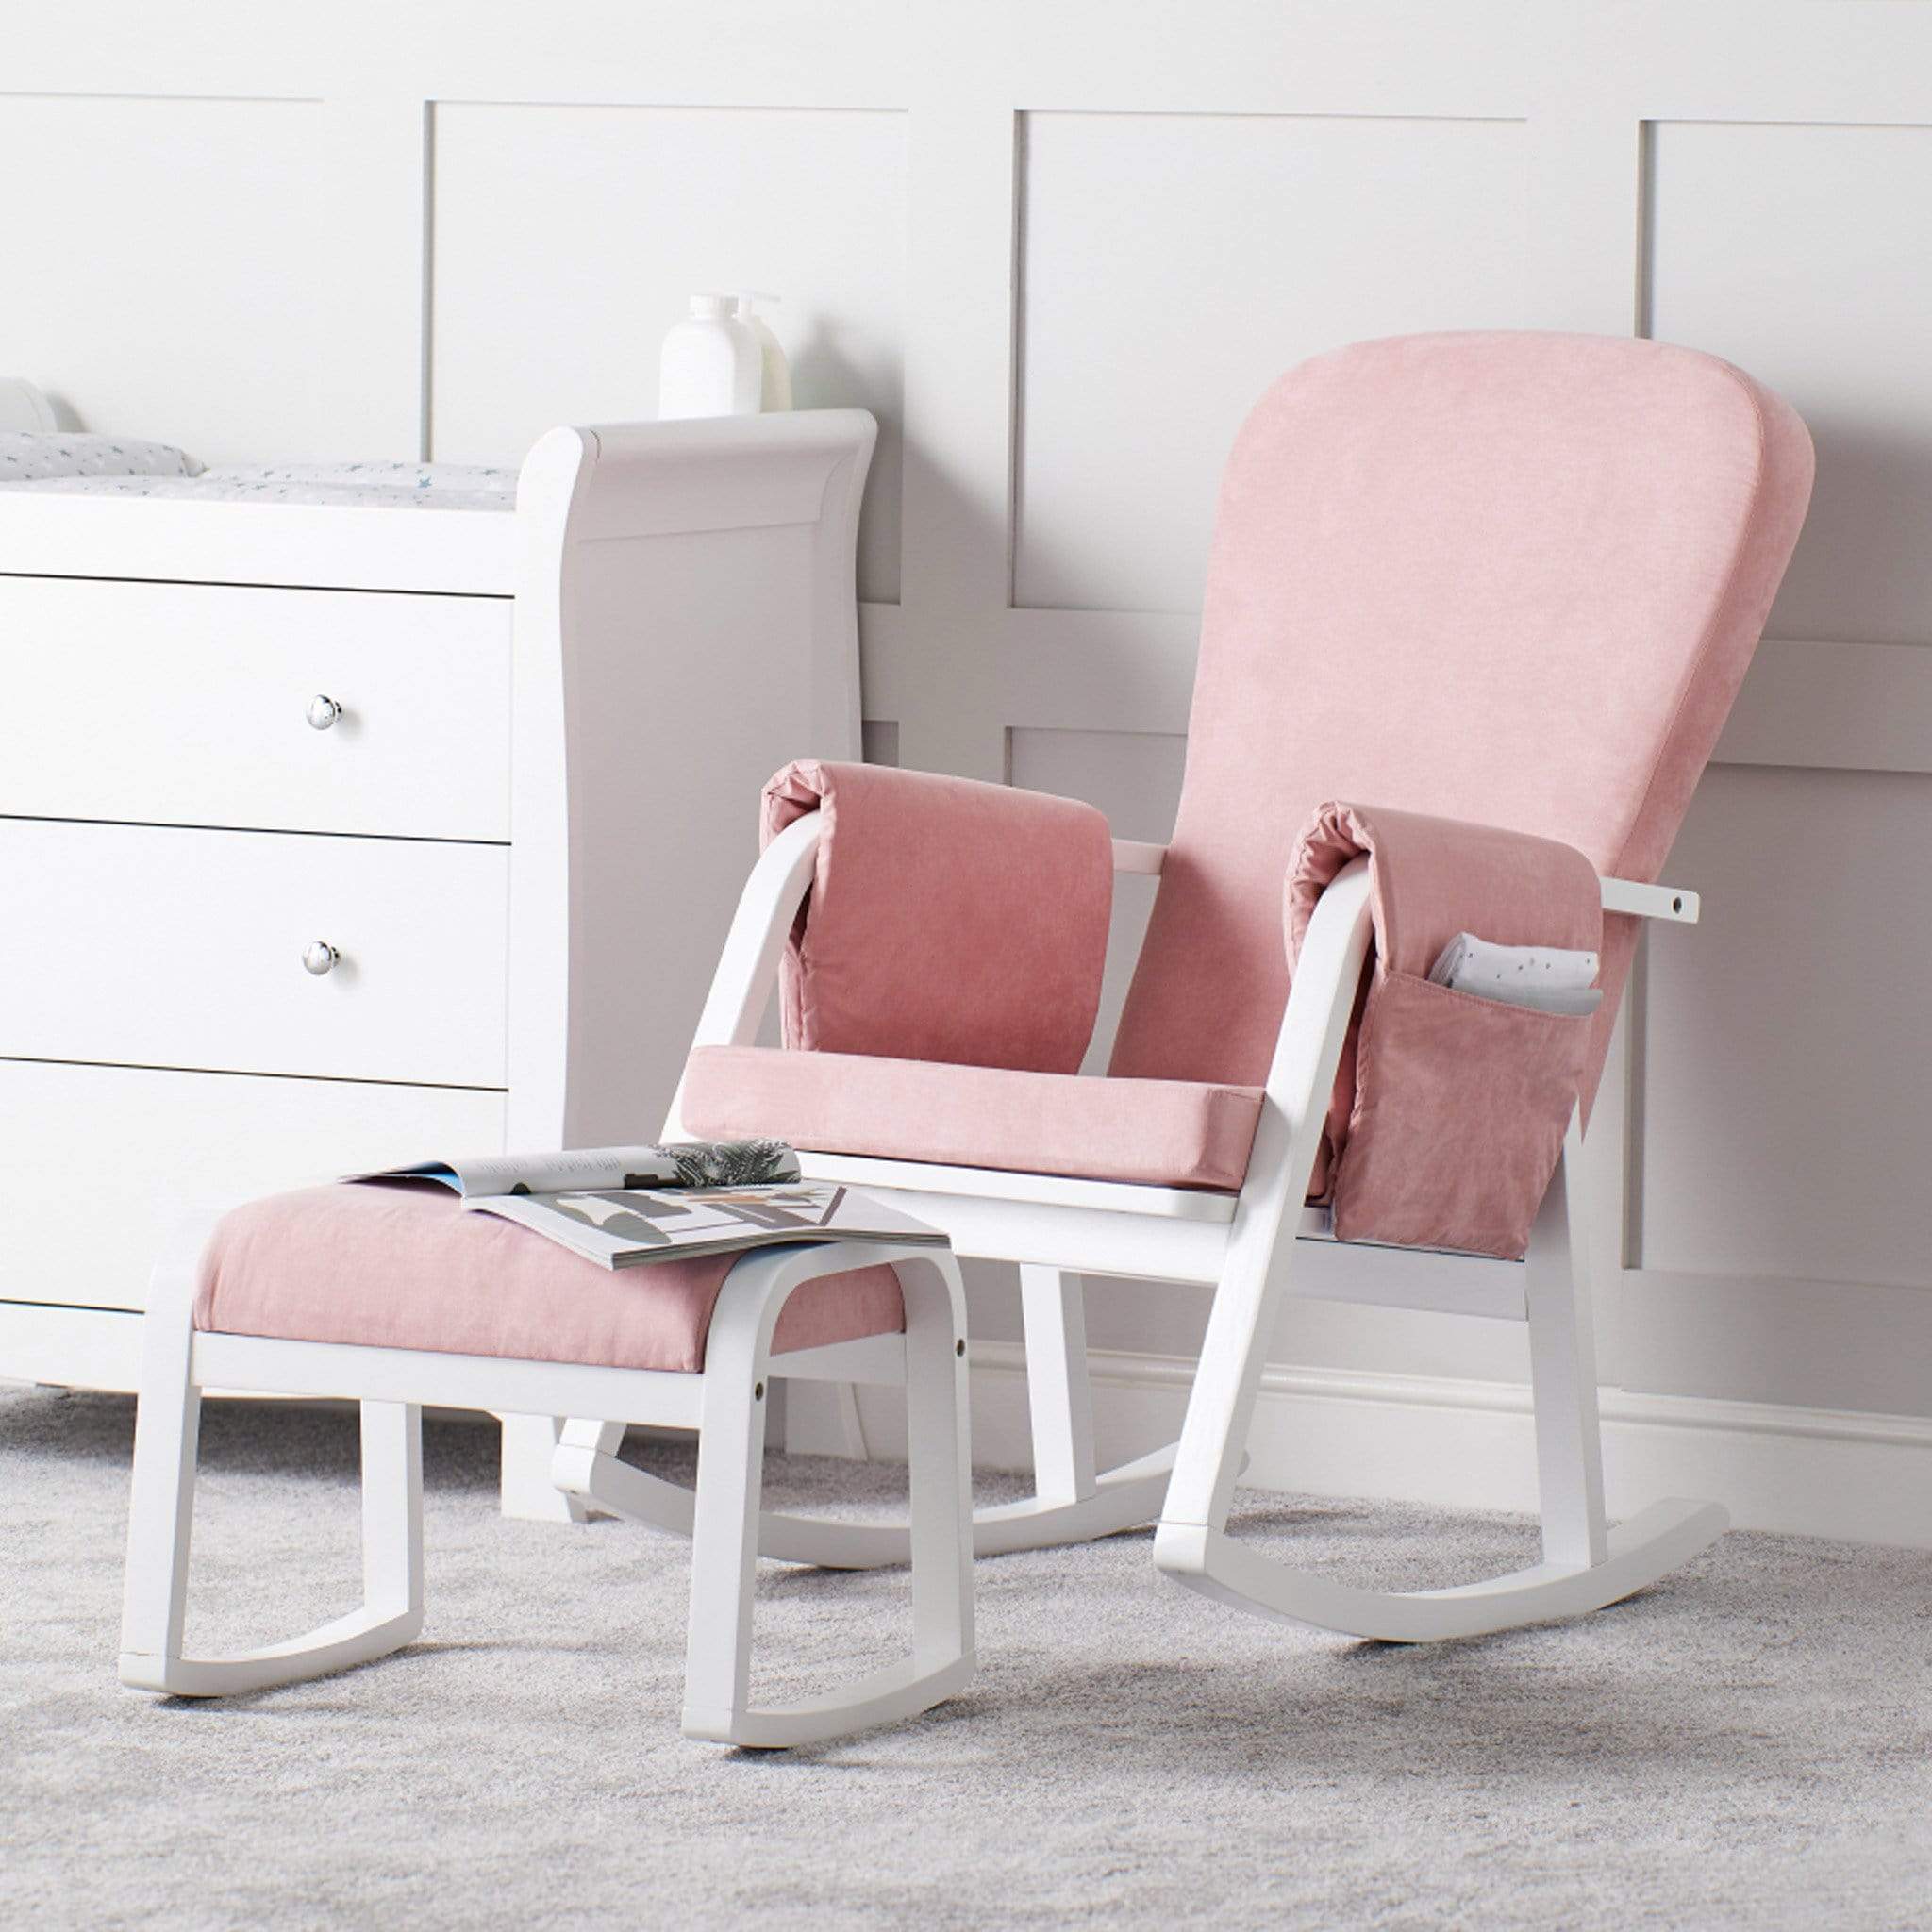 Ickle Bubba nursing chairs Ickle Bubba Dursley Rocking Chair and Stool Blush Pink 48-005-000-841